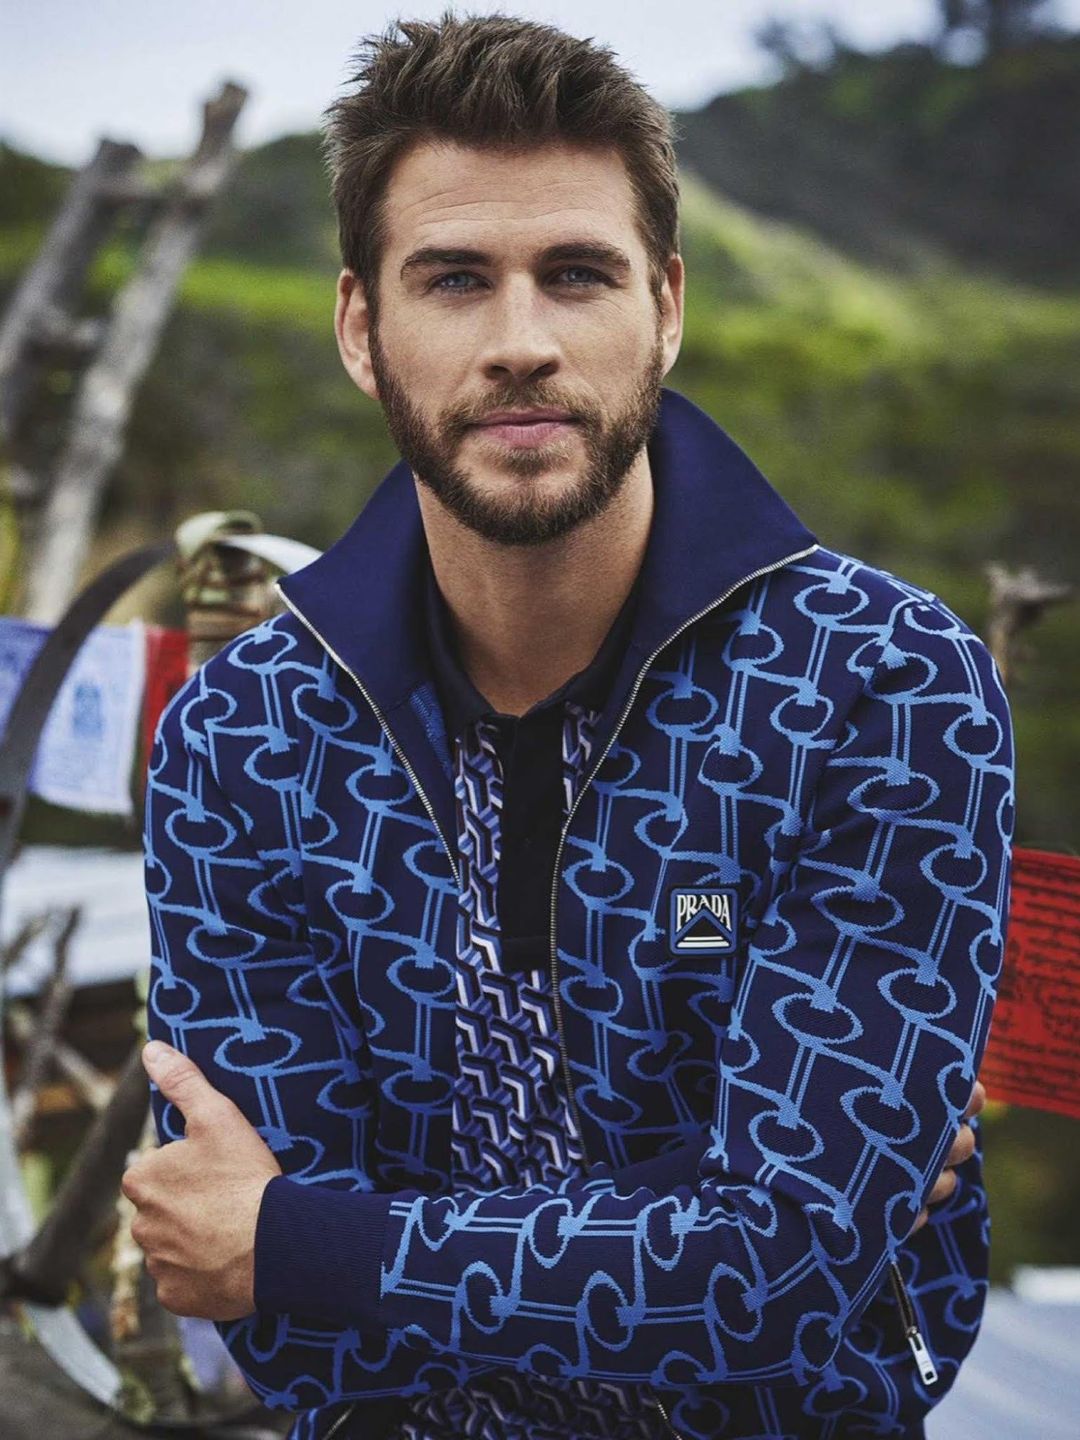 Liam Hemsworth who is his mother